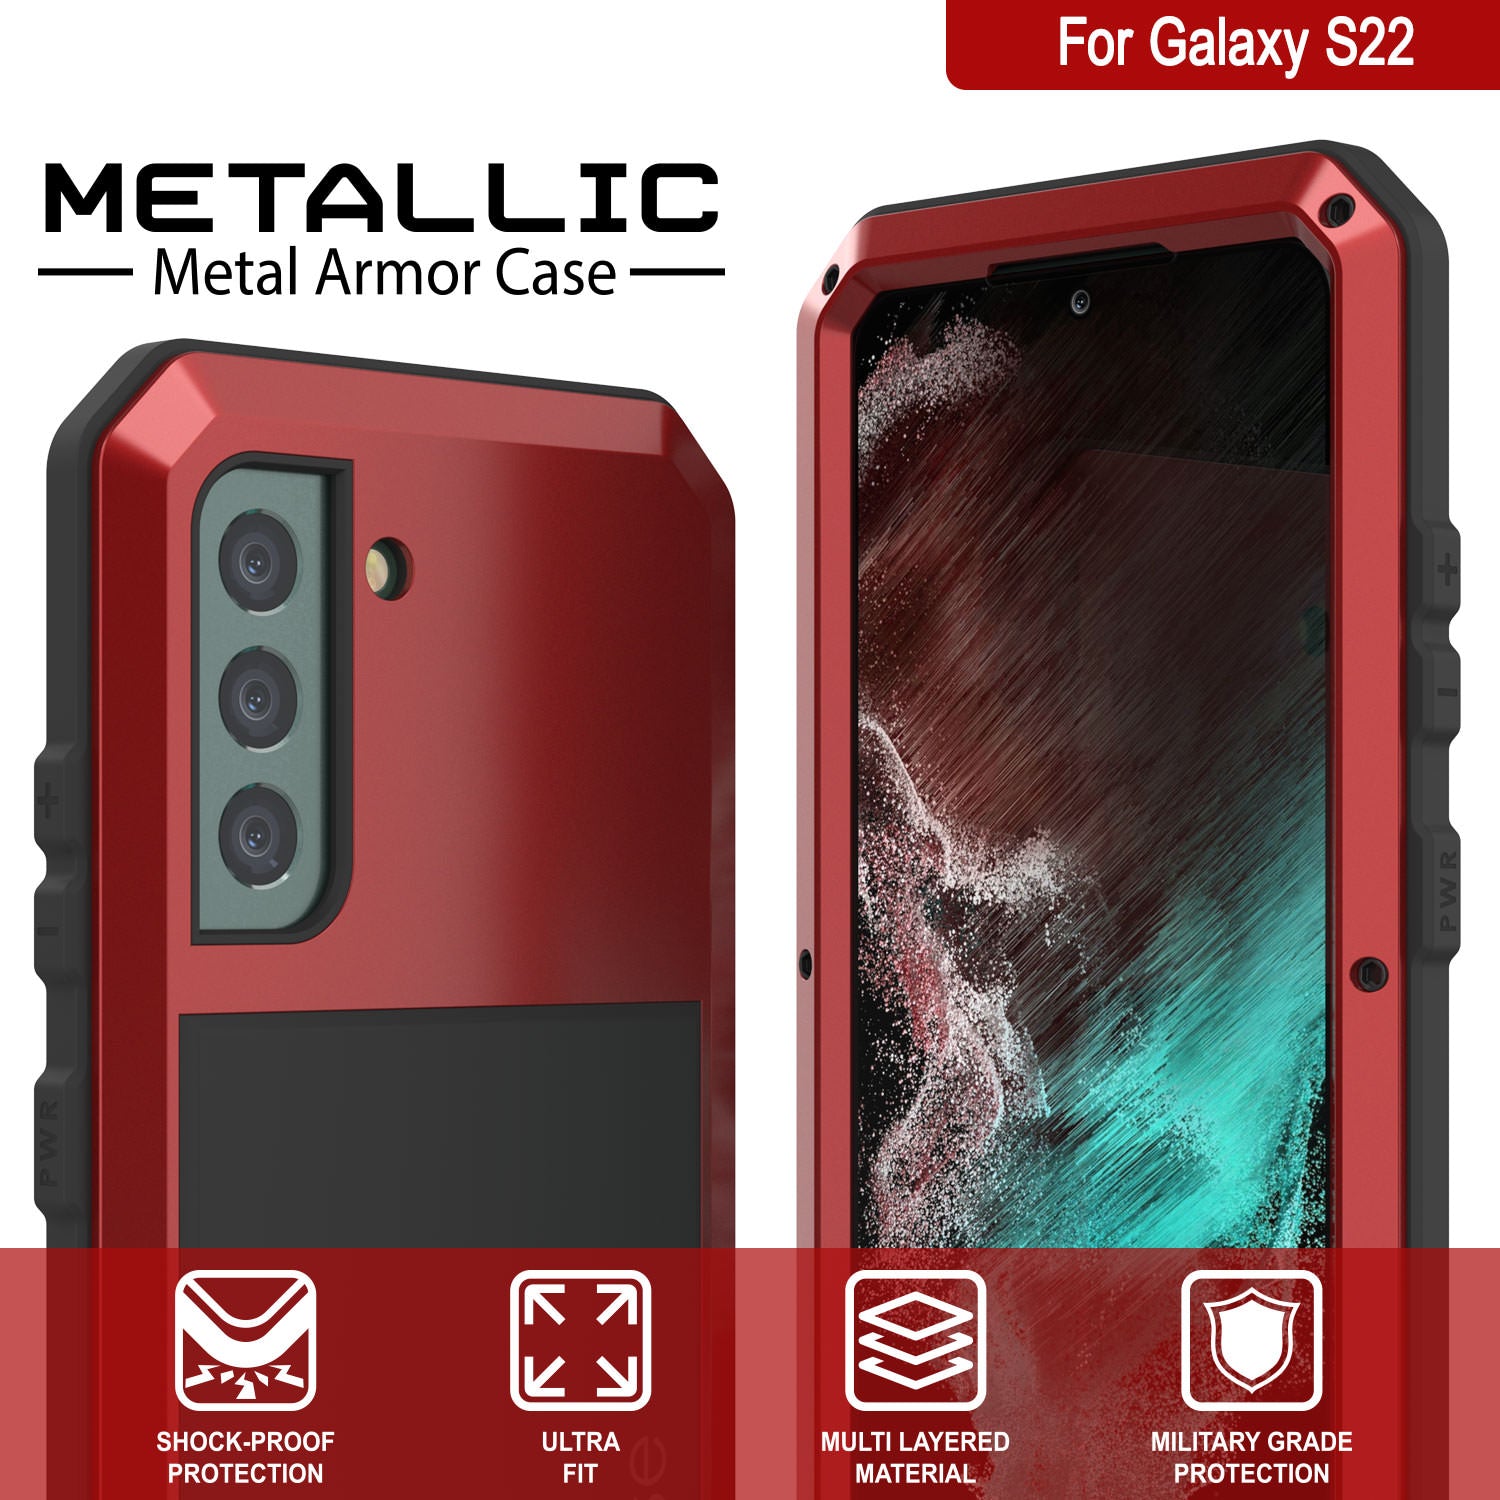 Galaxy S22 Metal Case, Heavy Duty Military Grade Rugged Armor Cover [Red]